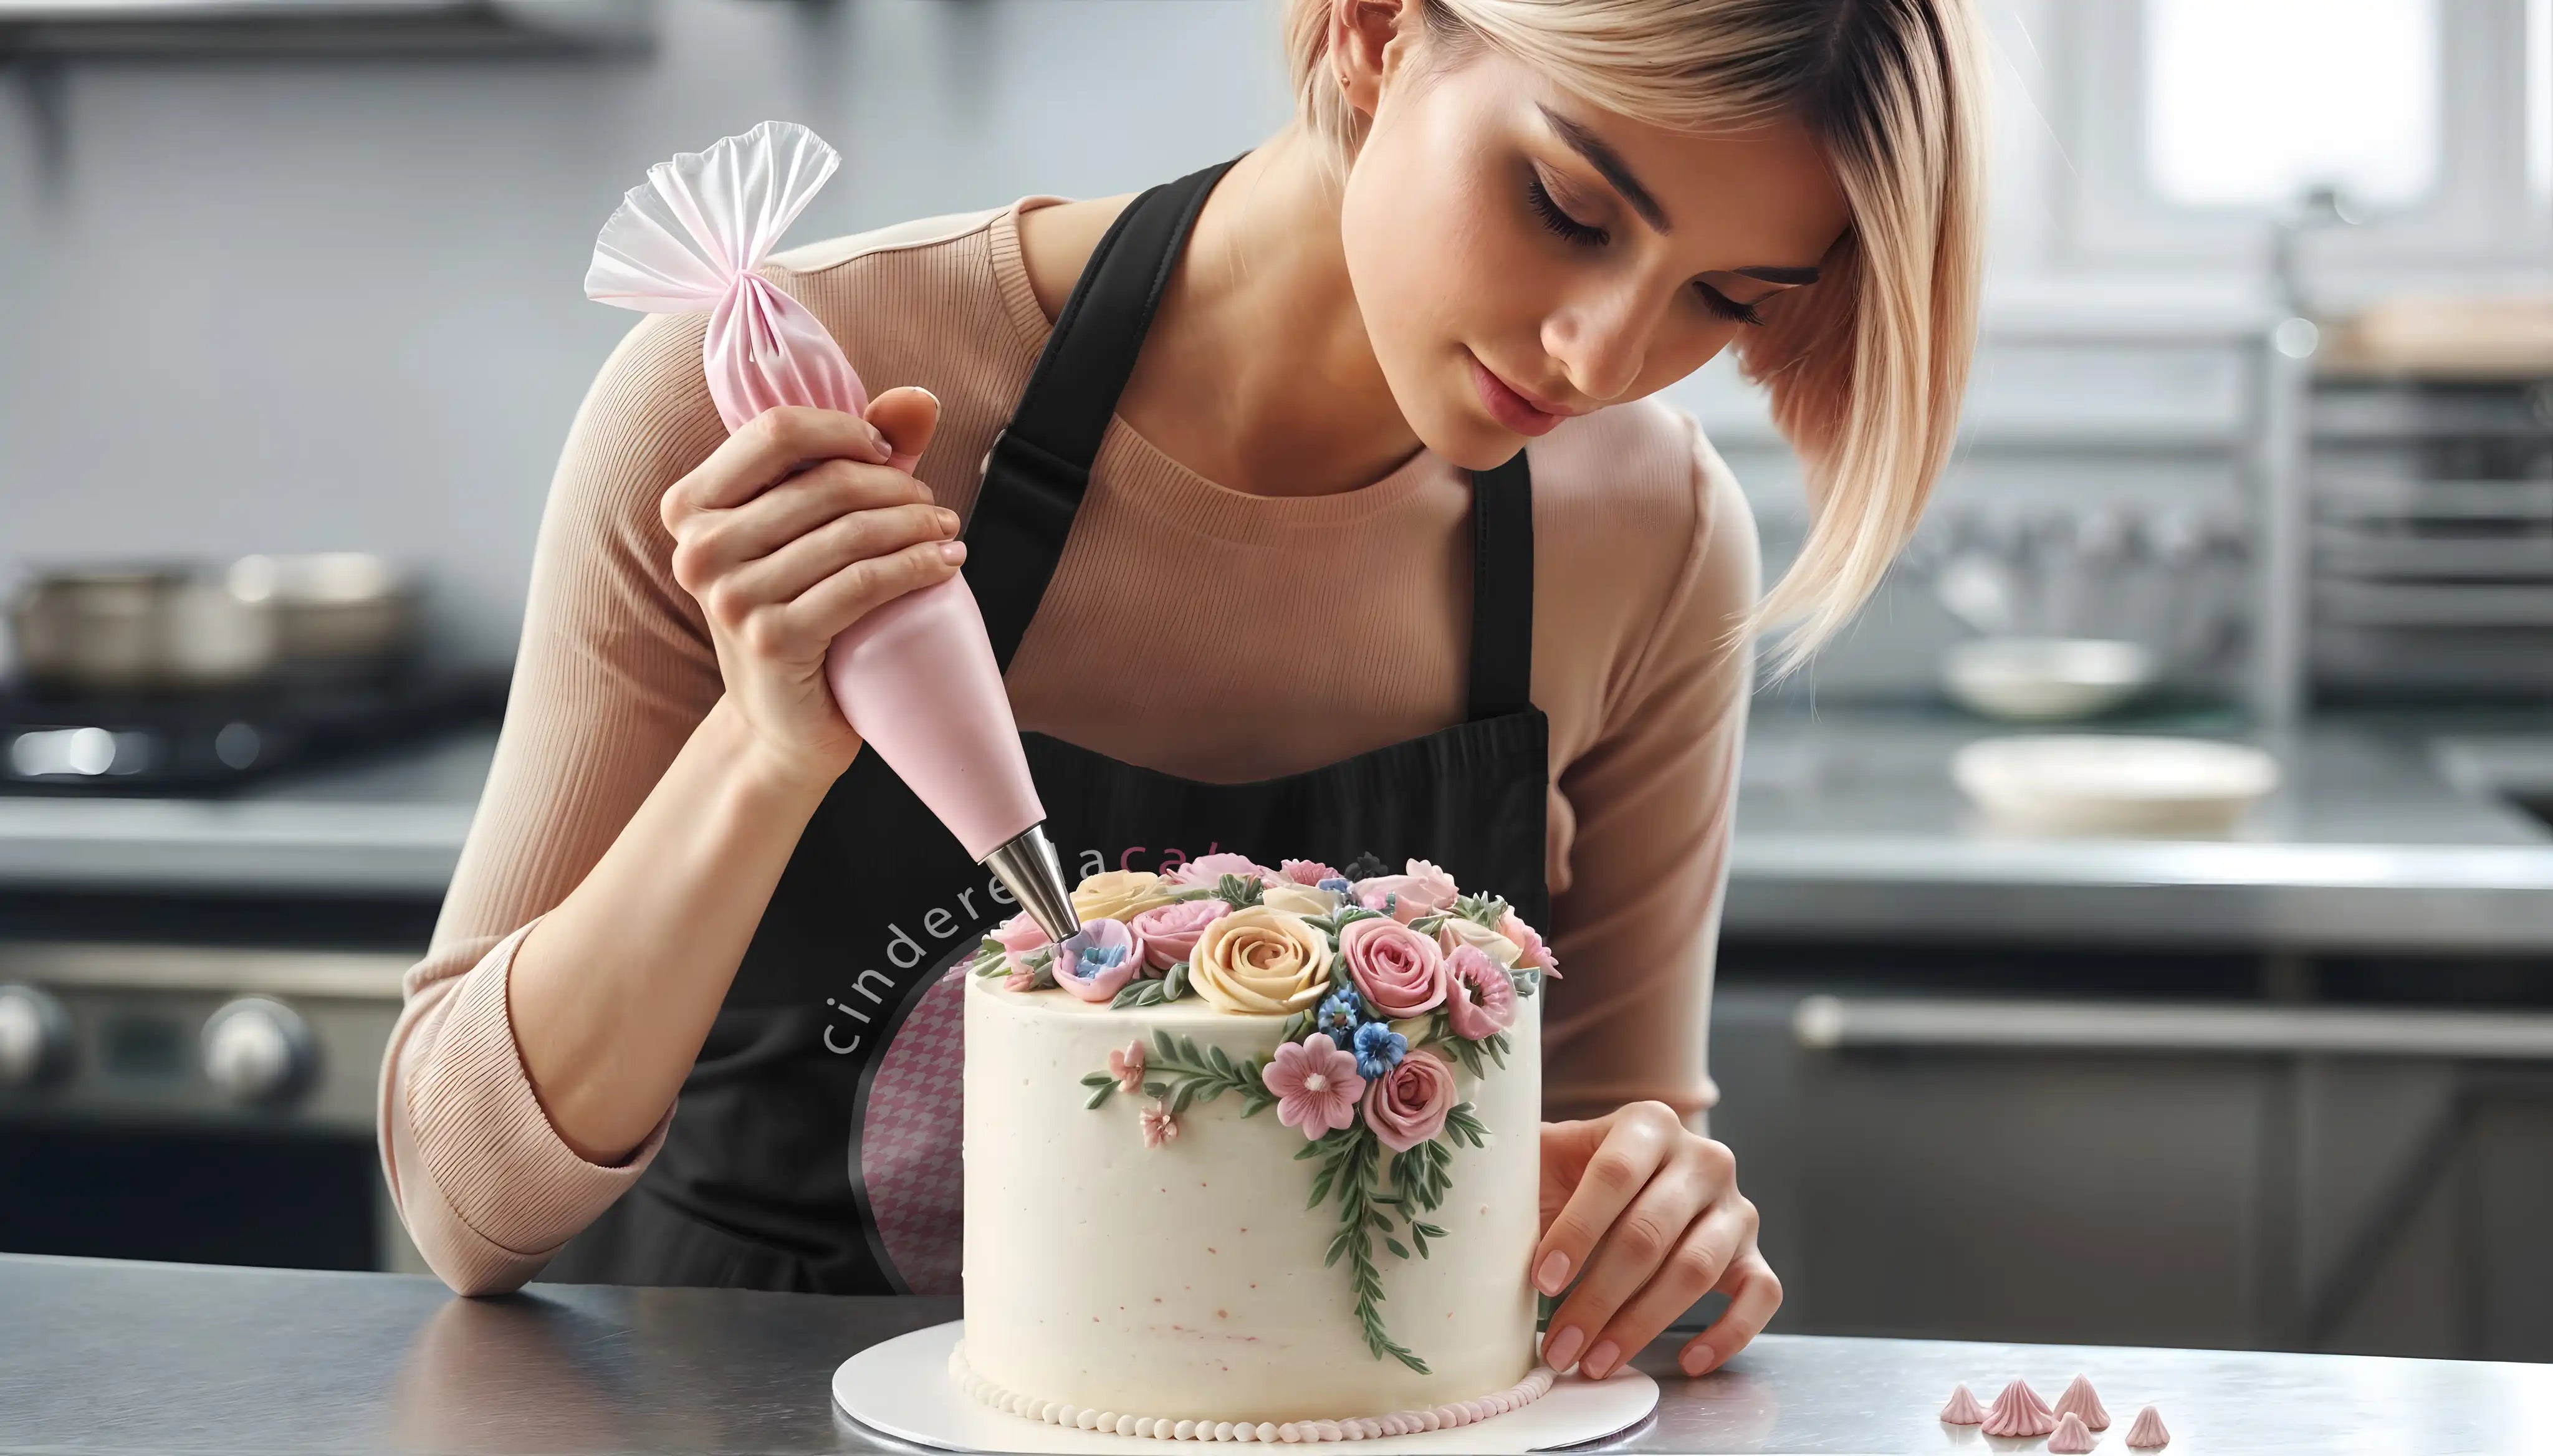 Female cake decorator decorating a cake with flowers